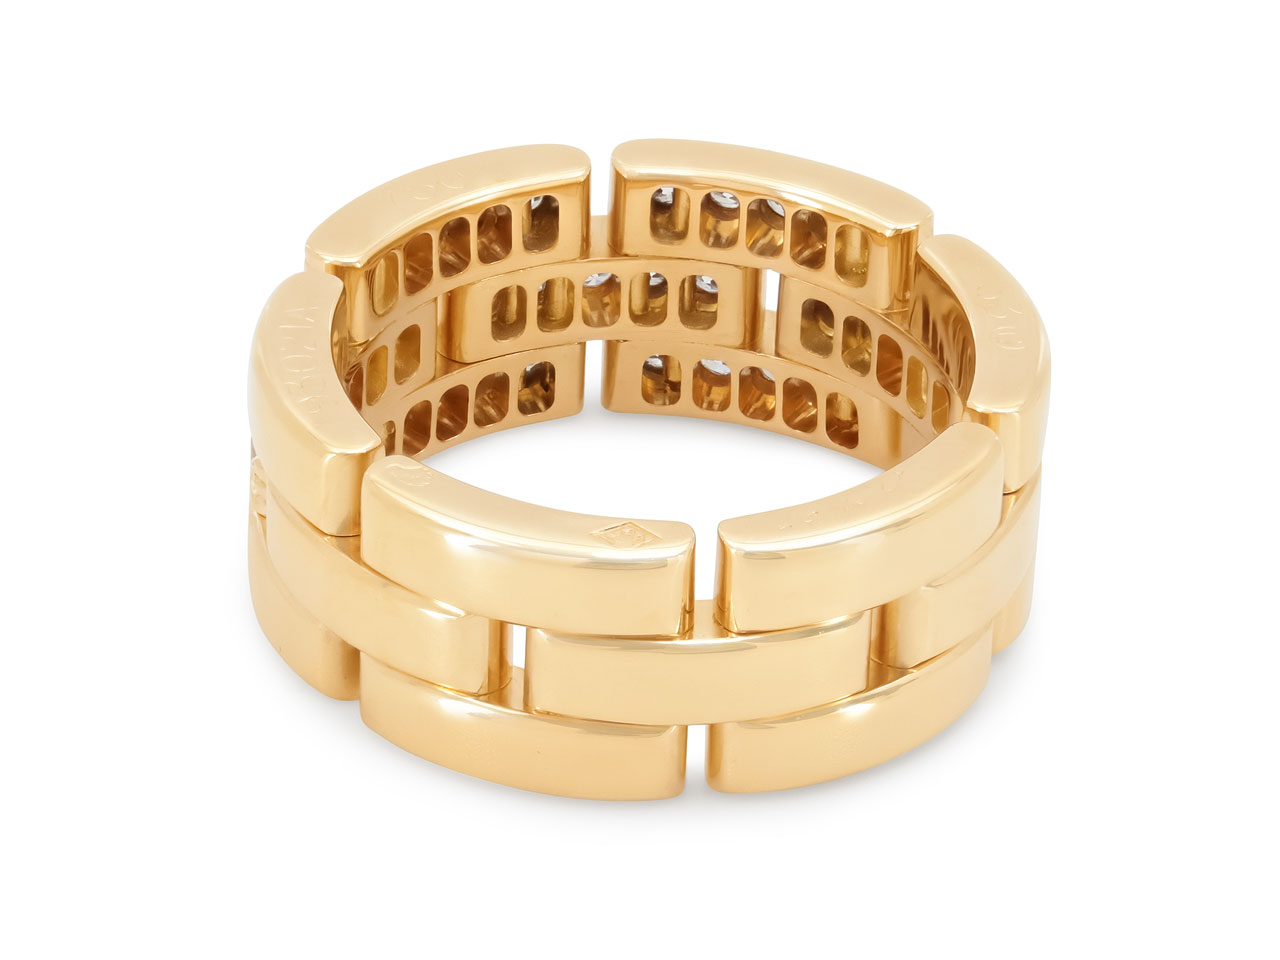 Cartier 'Maillon Panthère' Ring, 3 Half Diamond-Paved Rows, in 18K Gold